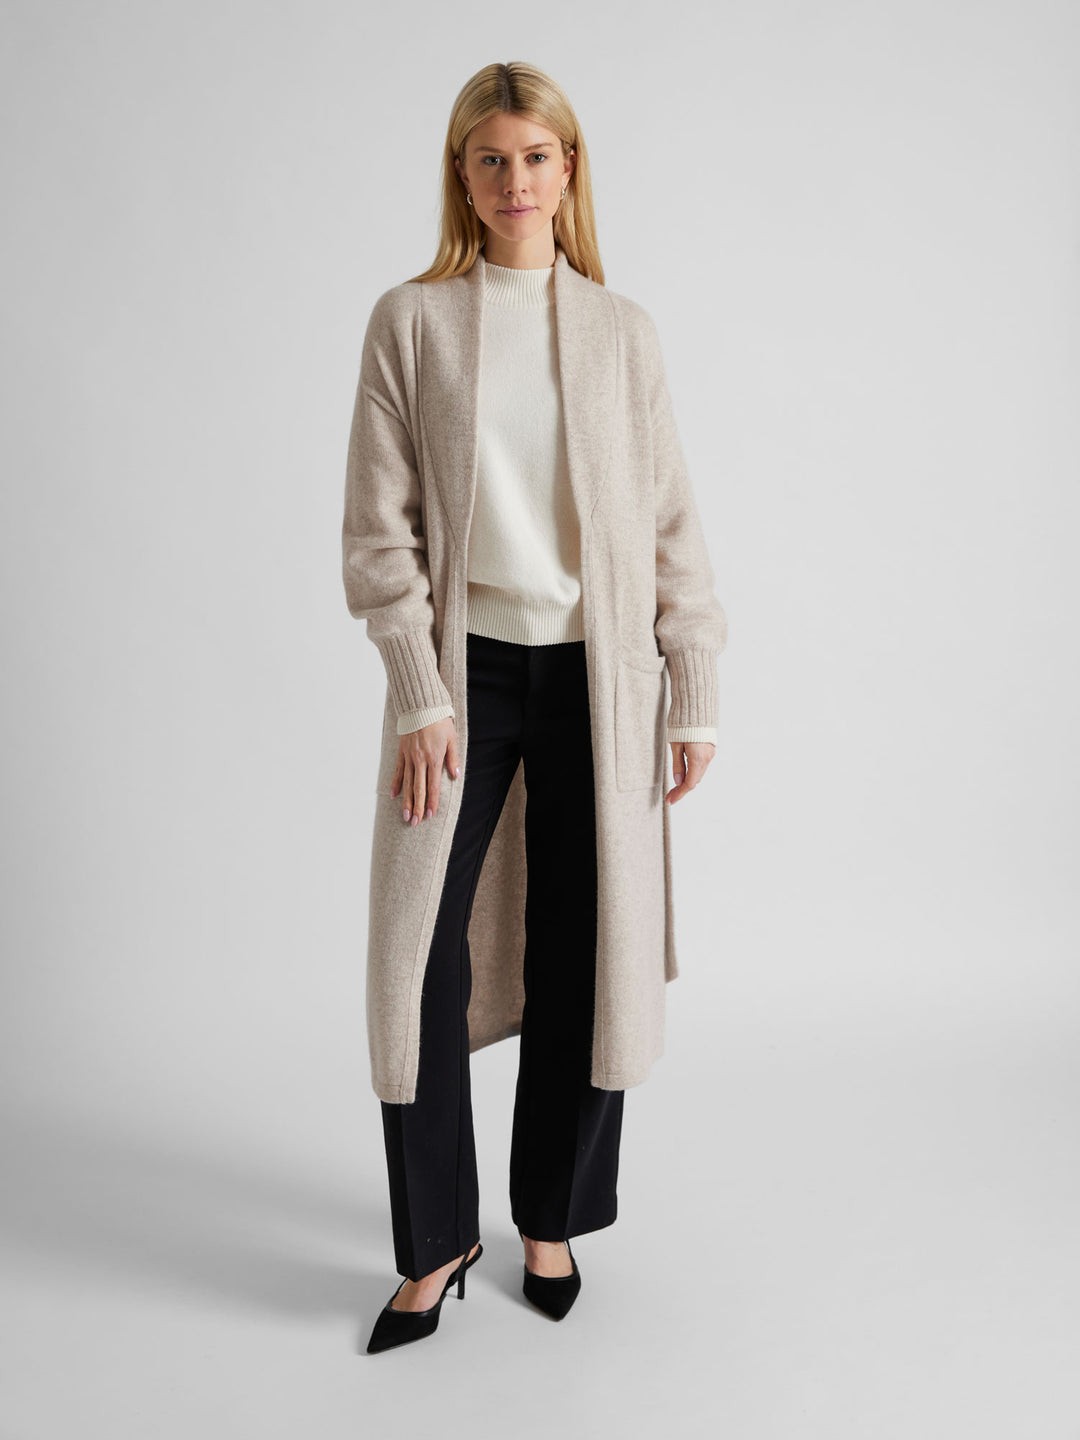 Cashmere coat "Trench" in 100% pure cashmere. Scandinavian dosing by Kashmina. Color: Beige.